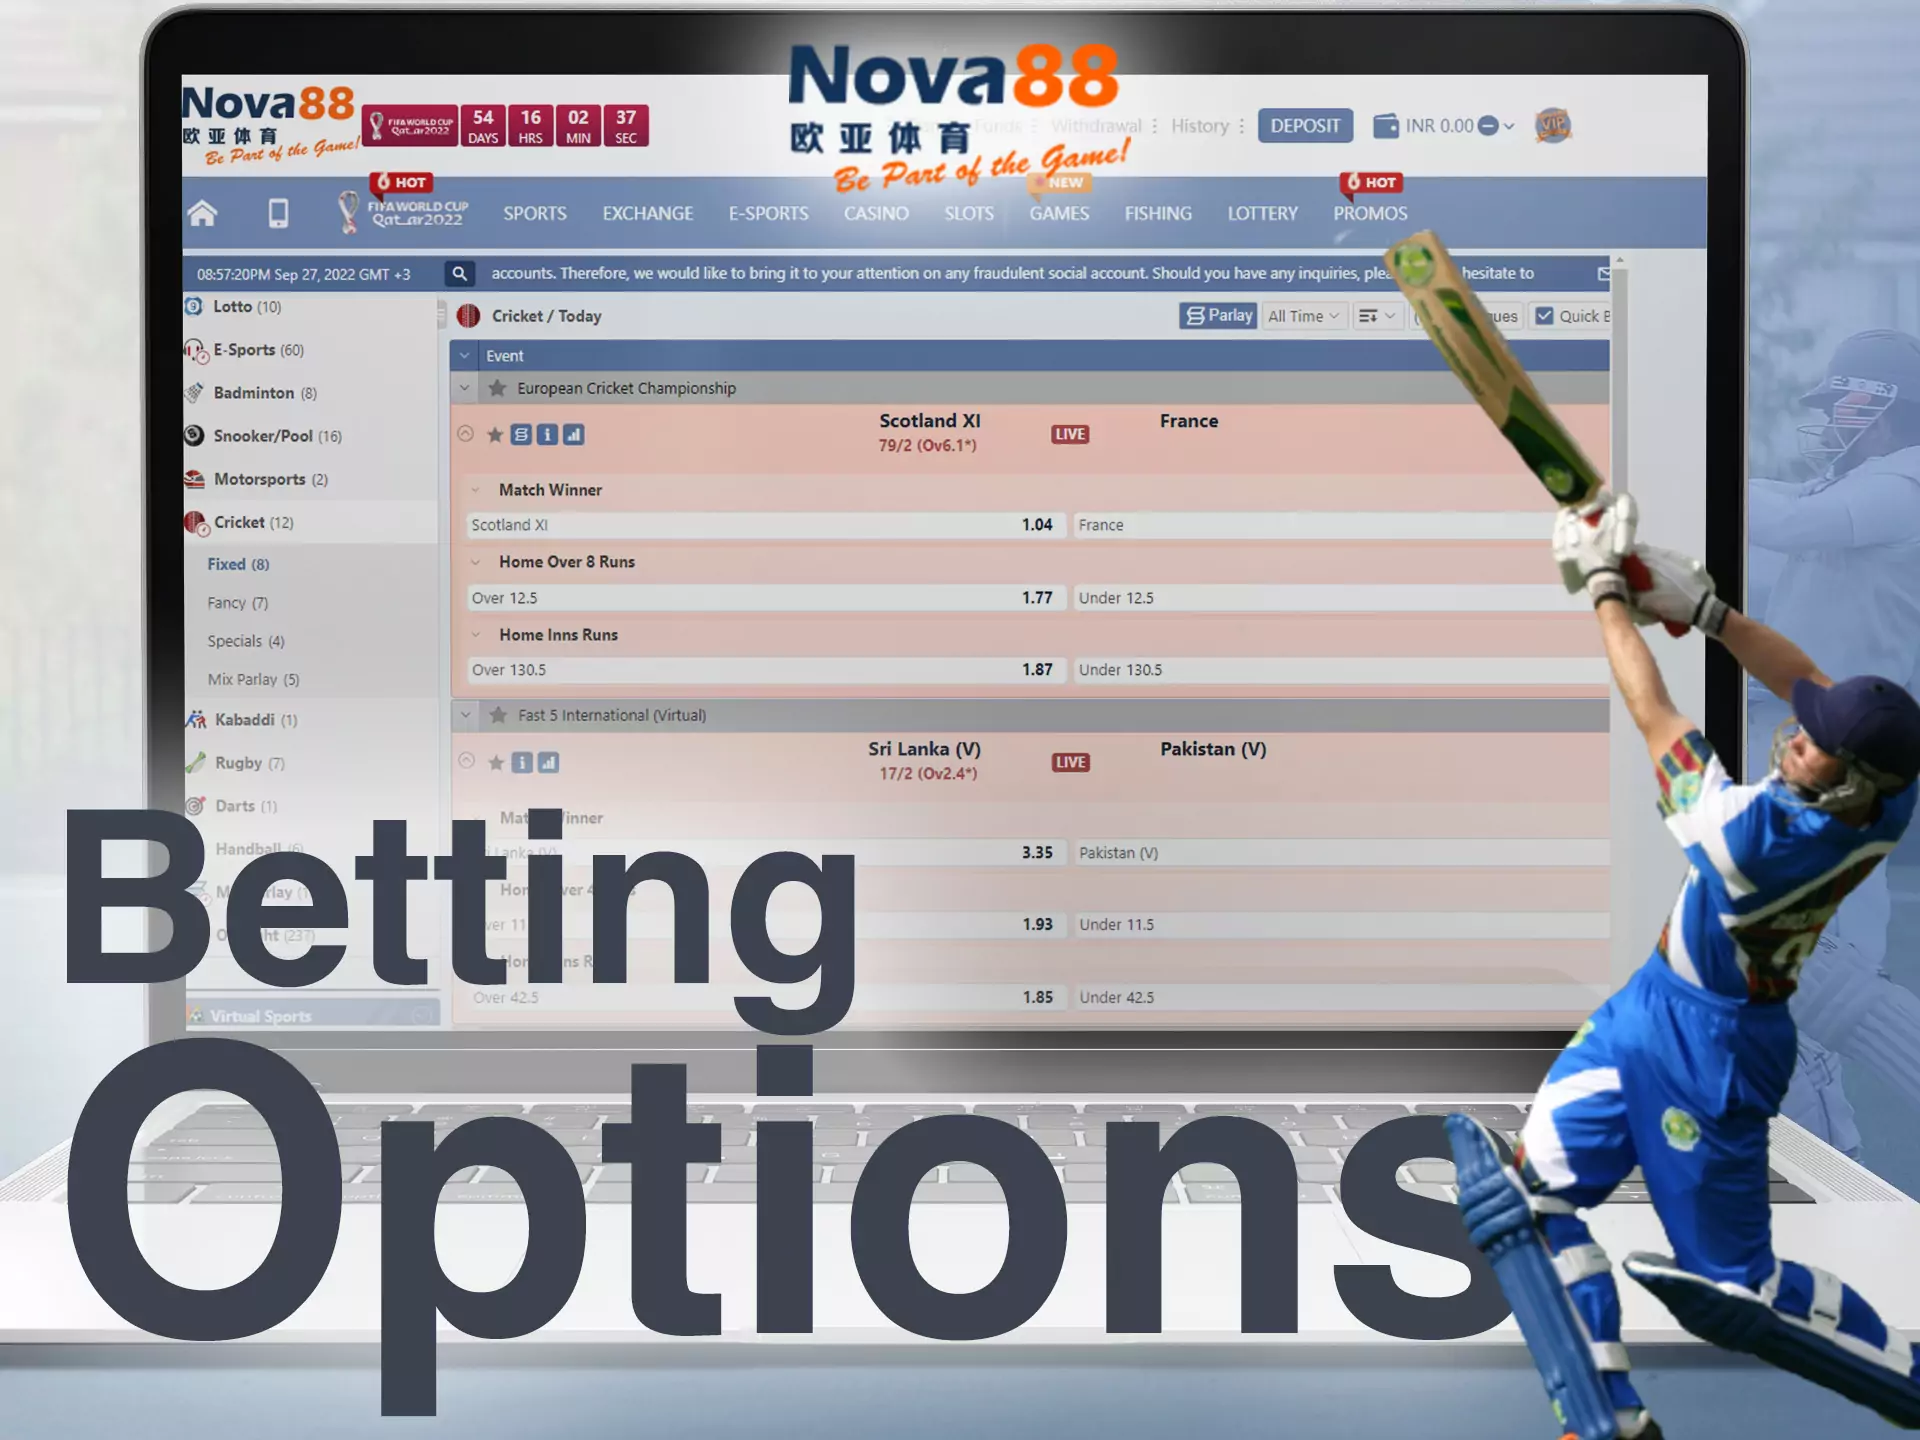 On Nova88, there are many betting options you can use as a user.